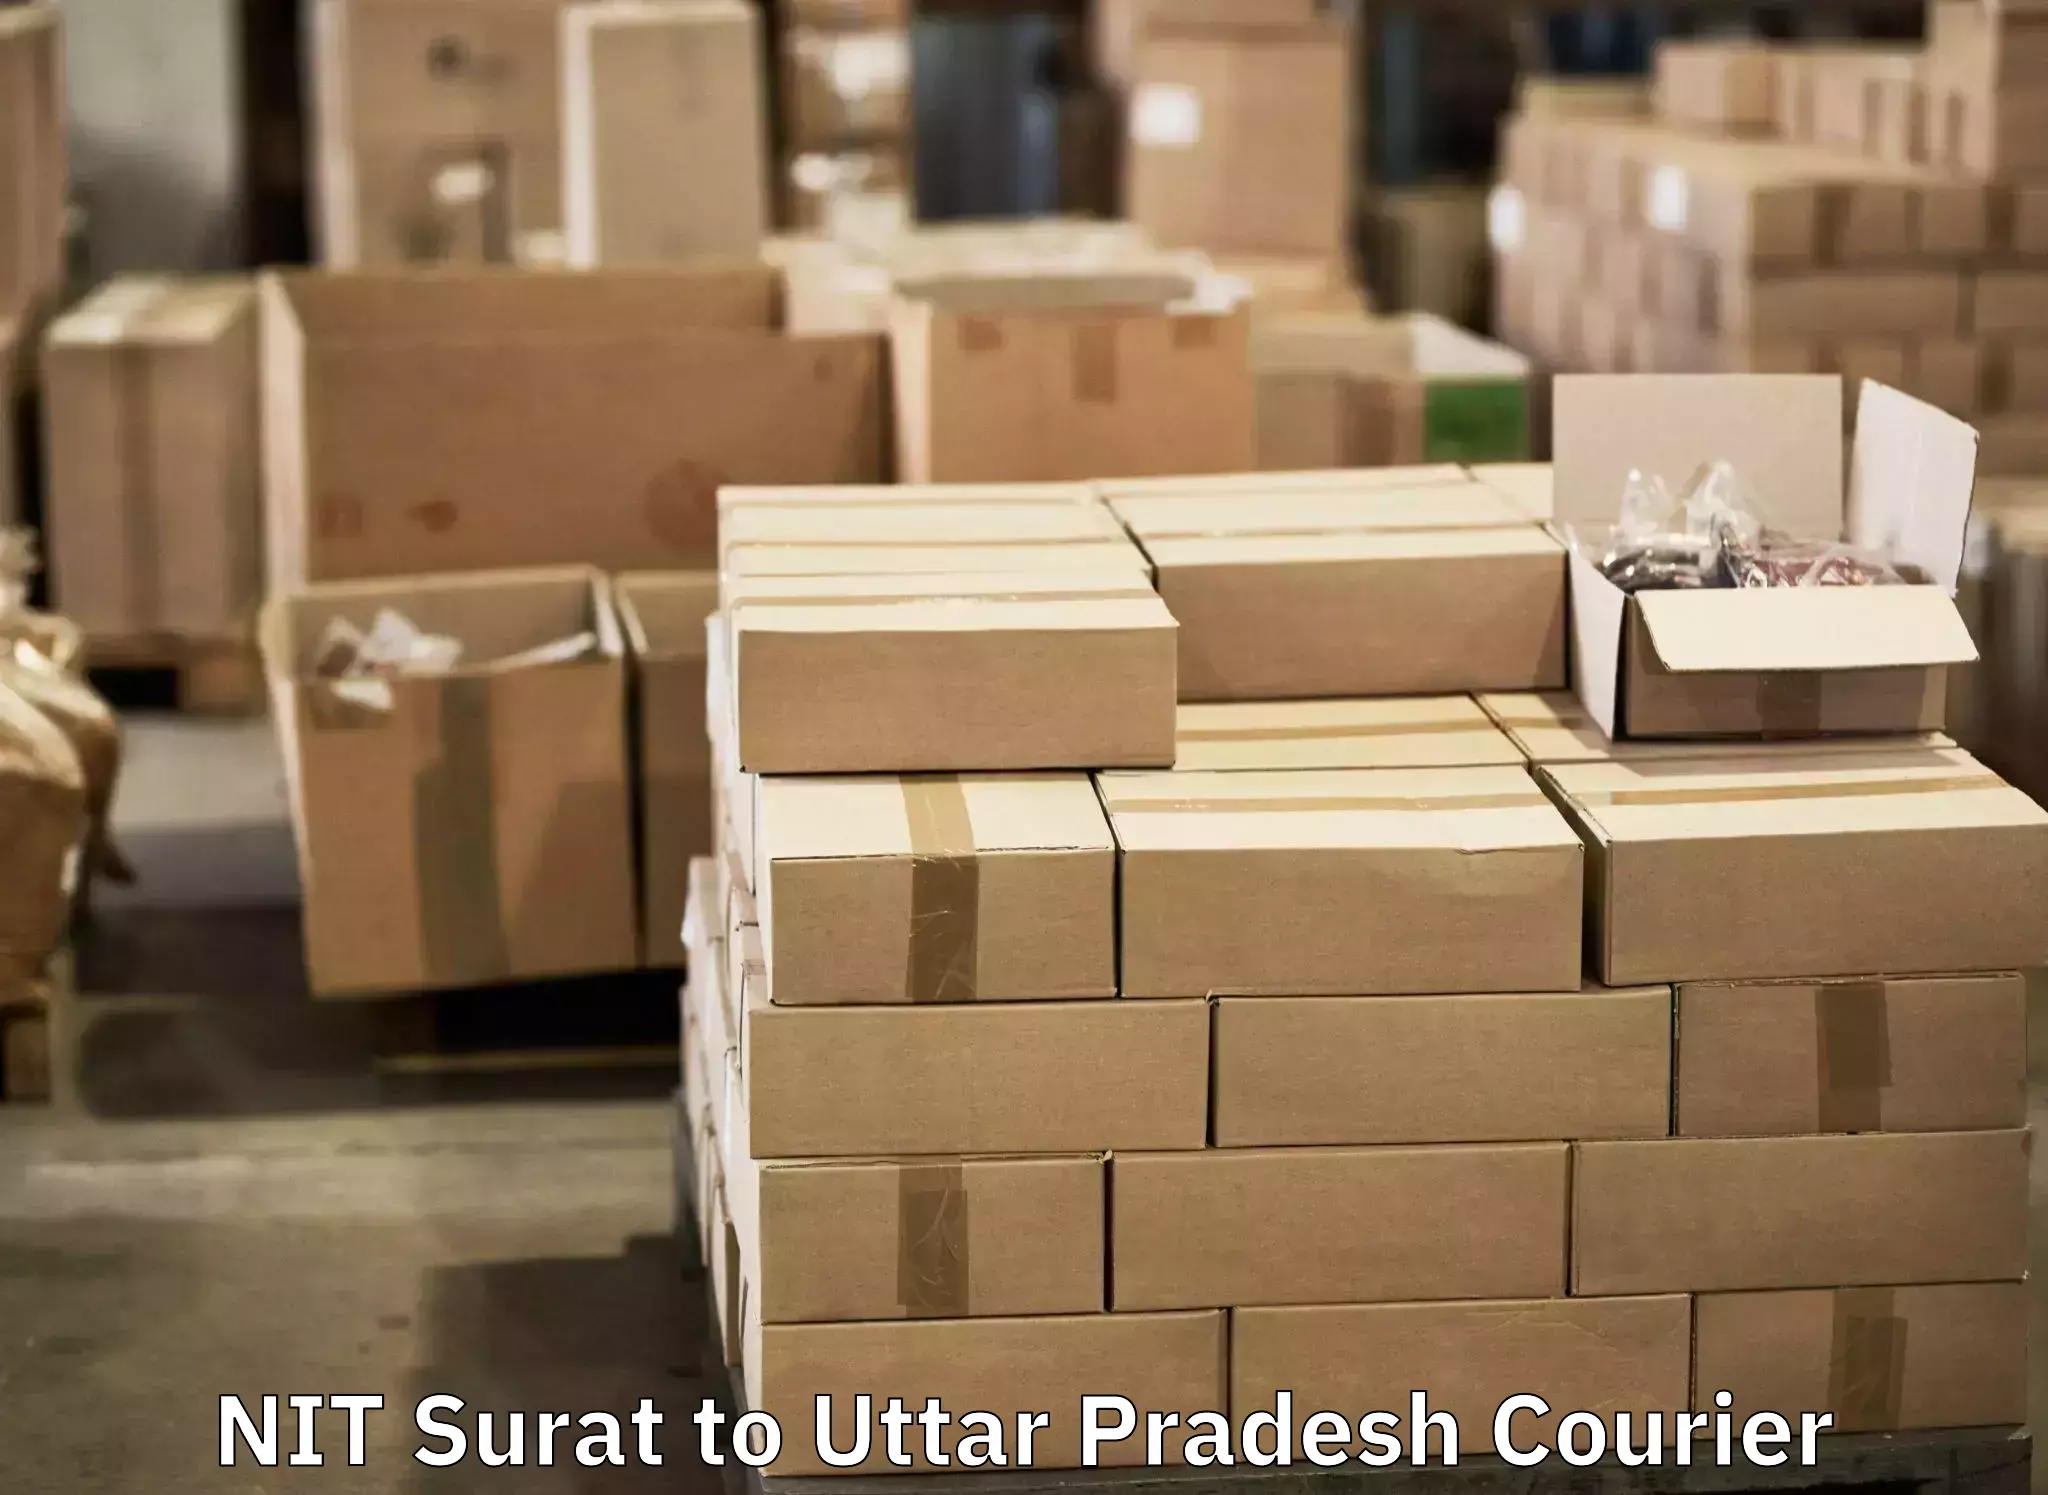 Luggage shipment specialists NIT Surat to Mathura